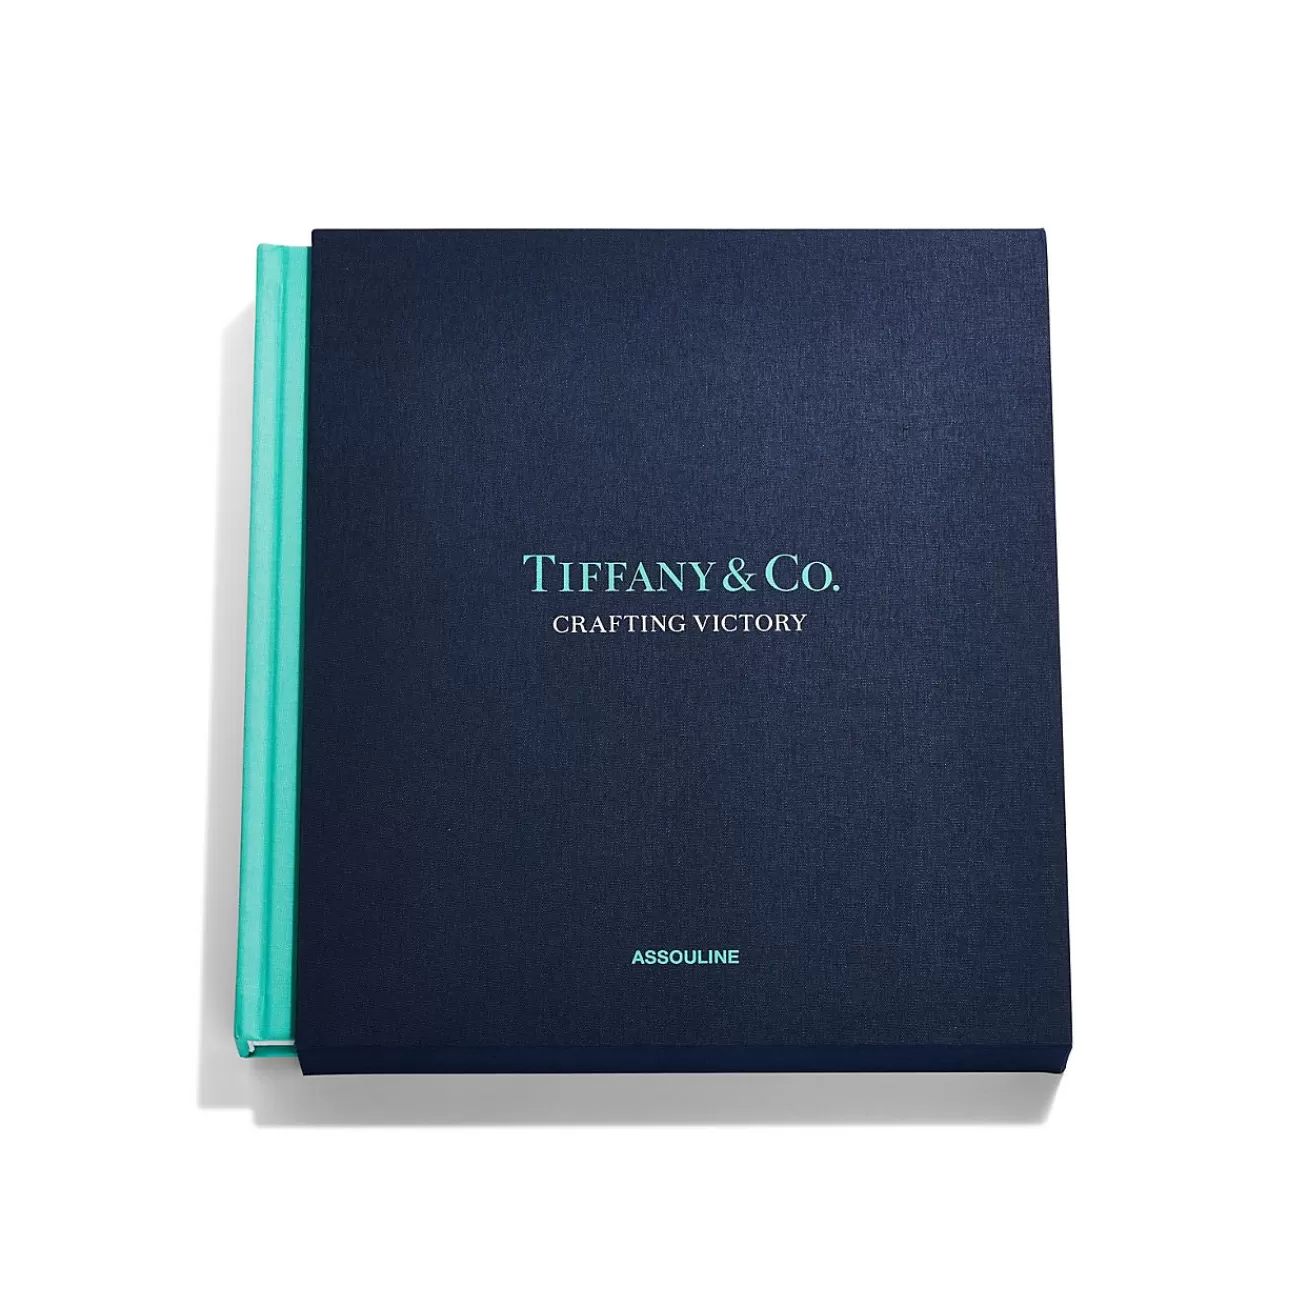 Tiffany & Co. Assouline "Crafting Victory" at Book | ^ Tiffany Blue® Gifts | Decor